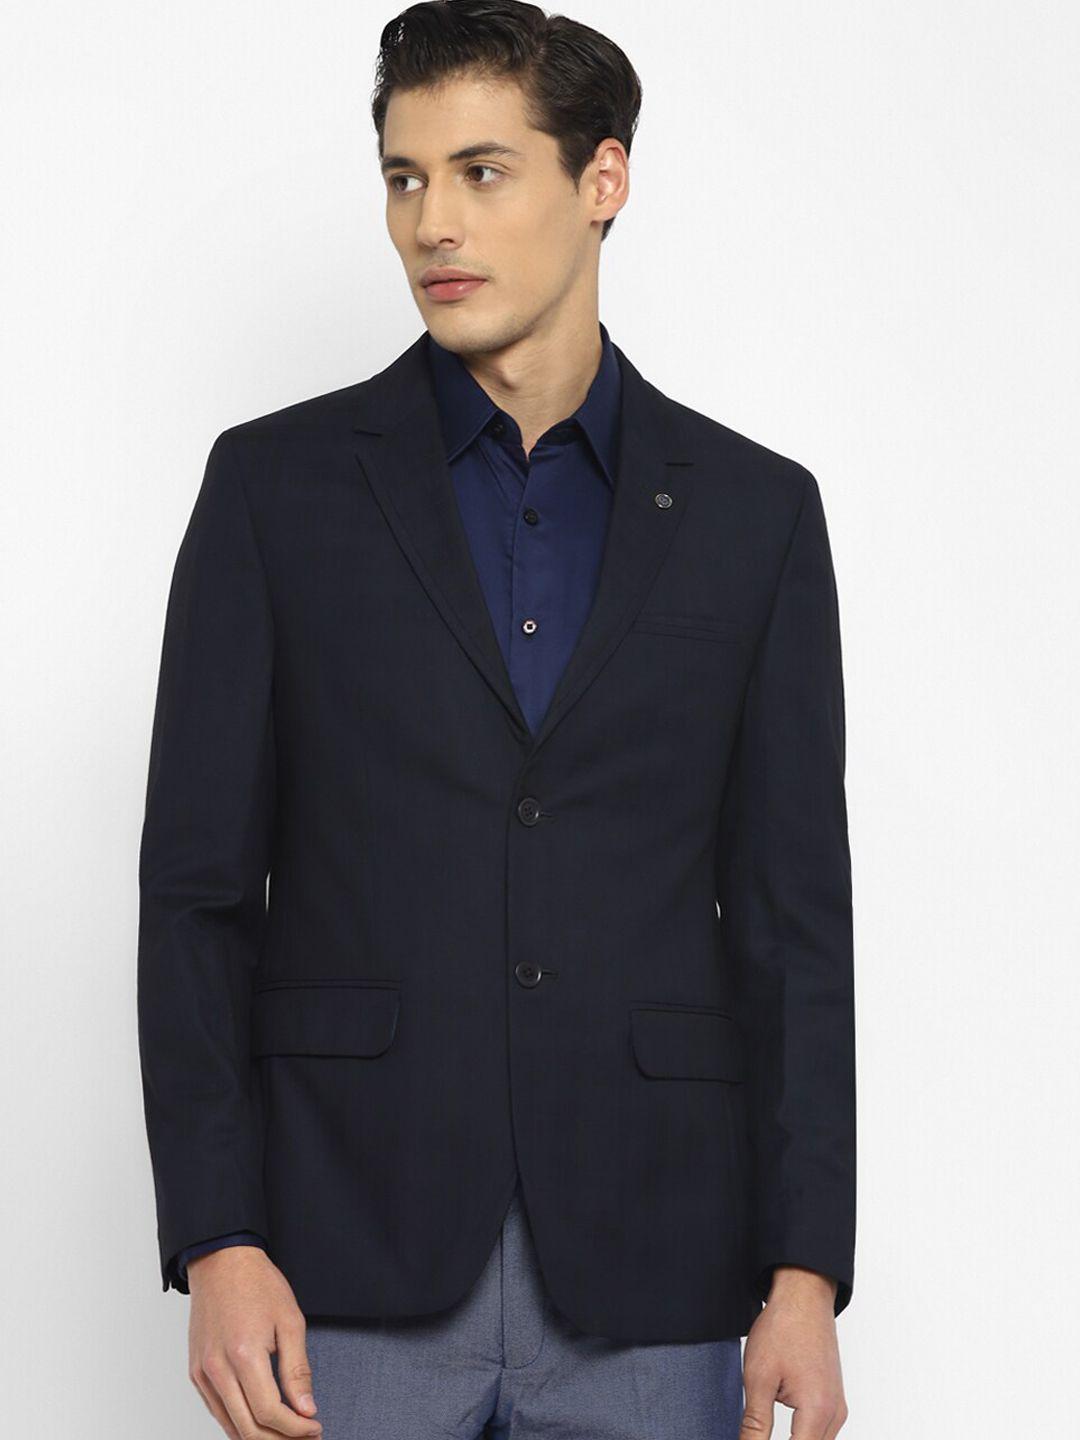 TOP BRASS Single Breasted Notched Lapel Formal Blazer